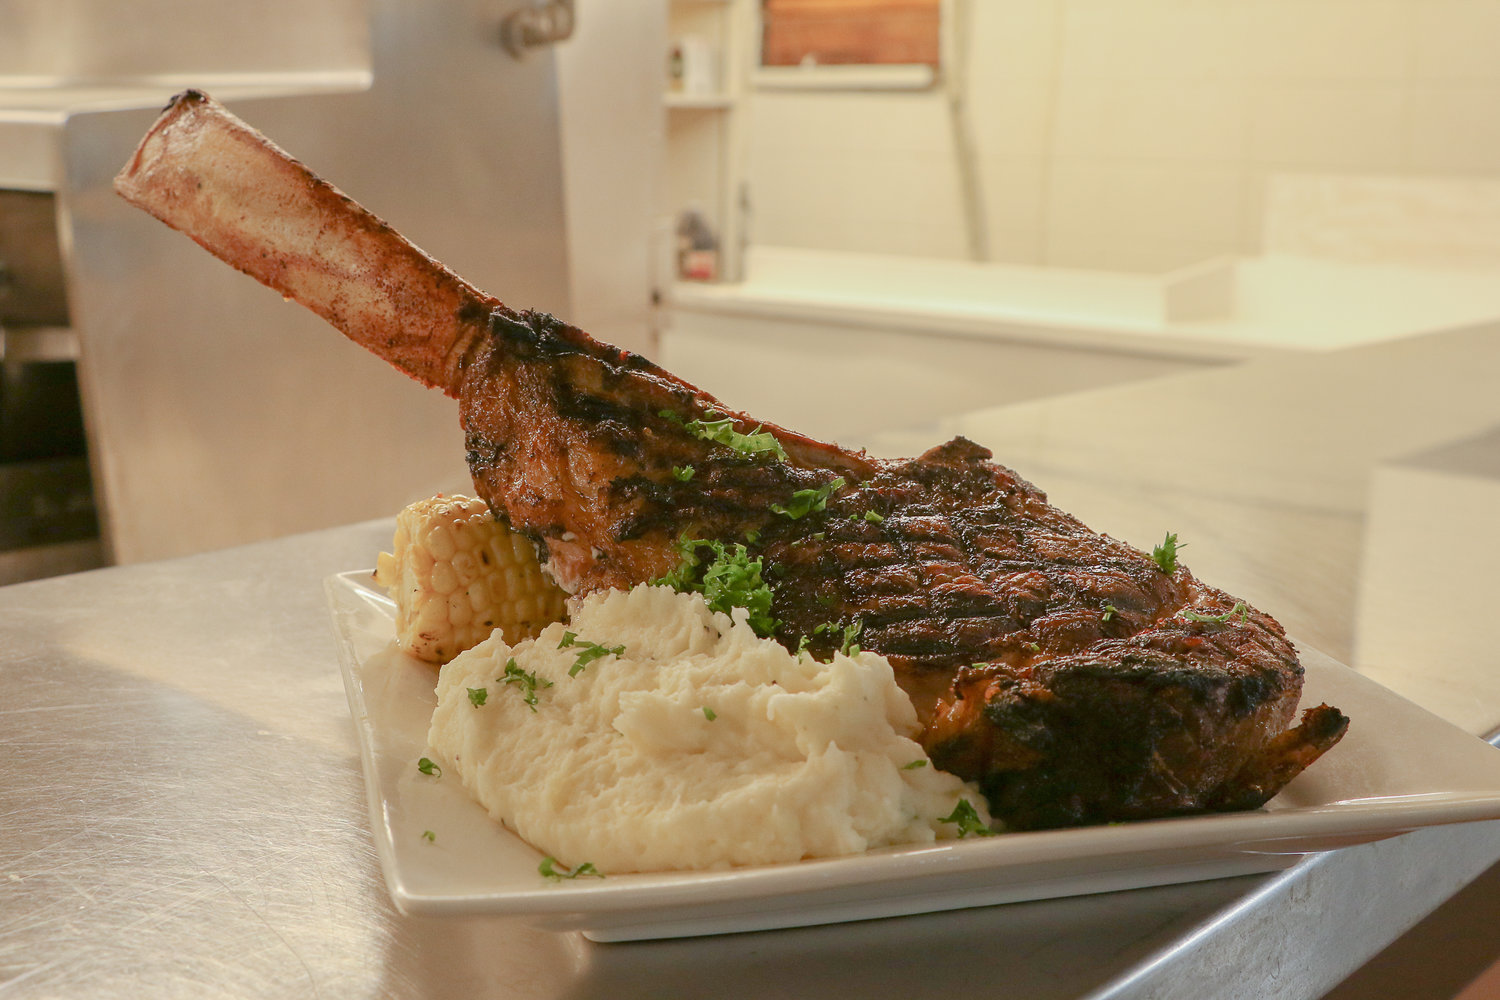 Prepared by Chef Eyner "Rene" Cardona, a tomahawk steak sits atop a pile of house-made mashed potatoes and grilled-corn-on-the-cob at the menu sampling for Cardona's new restaurant in Chehalis, Ocean Prime.